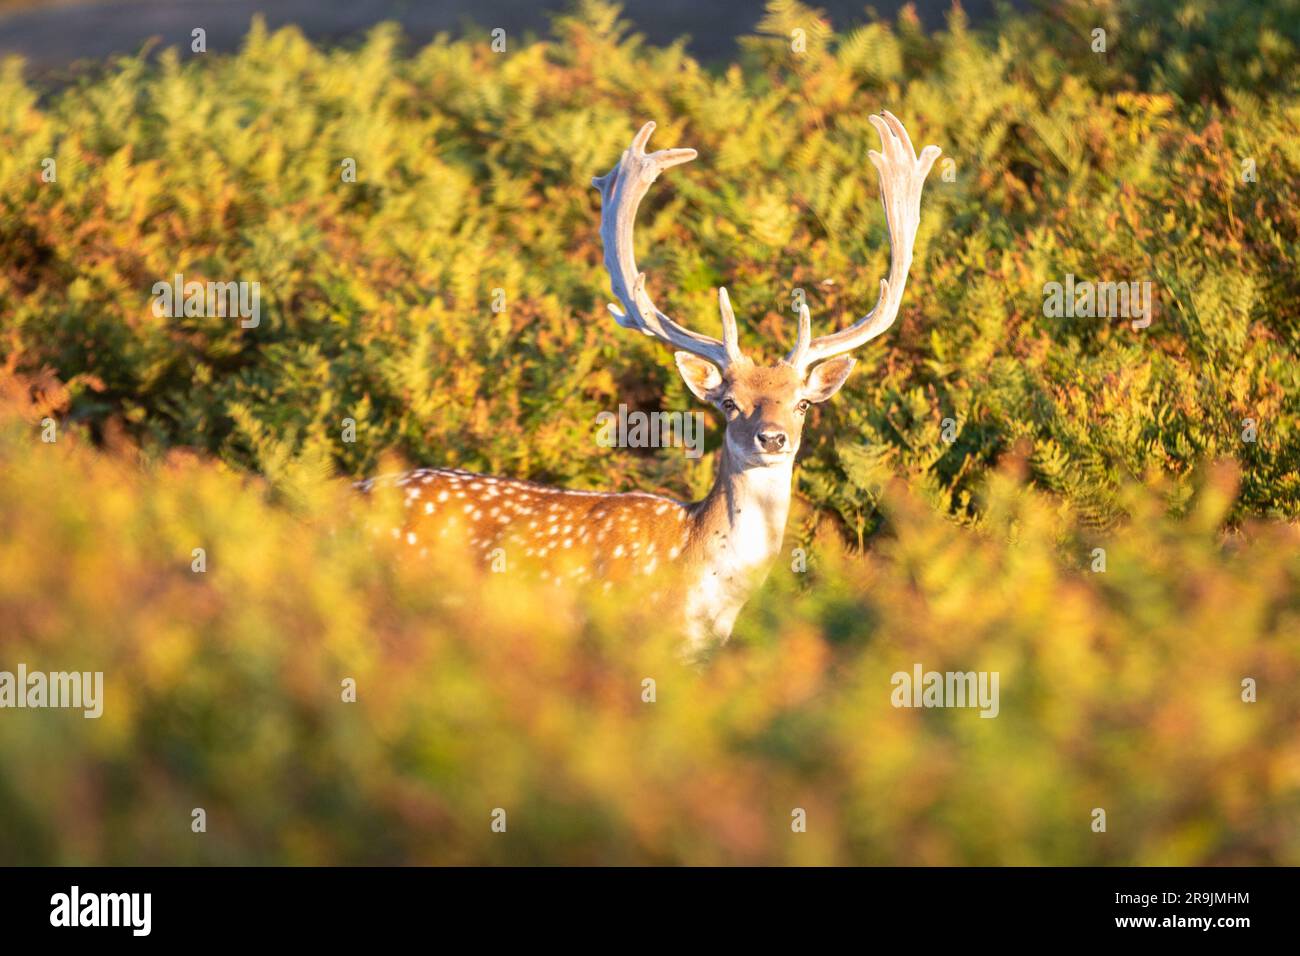 This photo shows a large deer in the dunes of the Netherlands. The deer stands between the bushes. Stock Photo